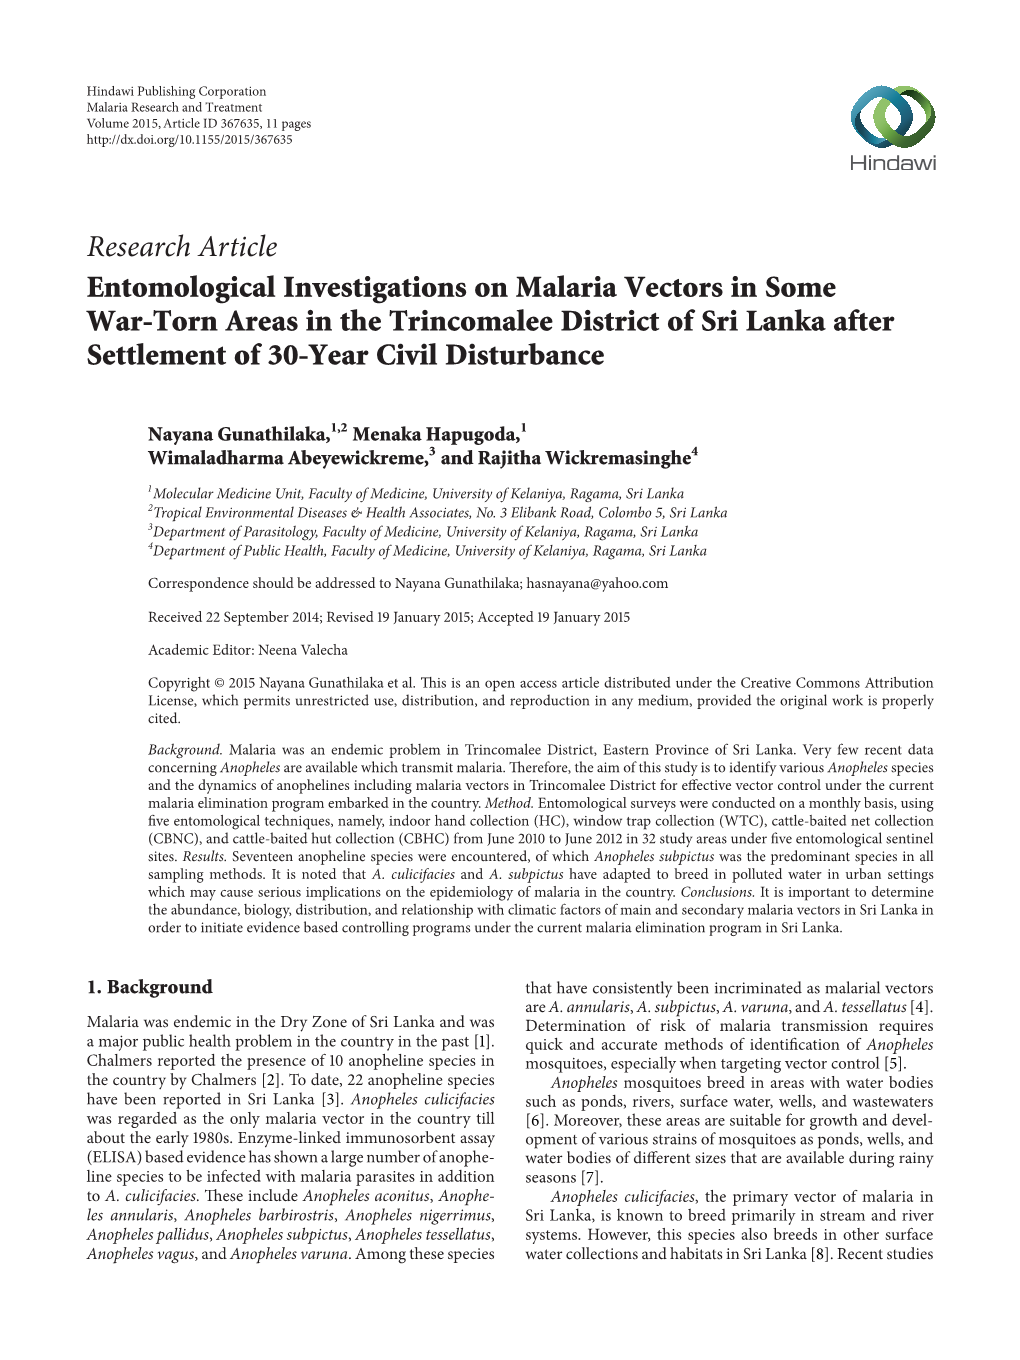 Entomological Investigations on Malaria Vectors in Some War-Torn Areas in the Trincomalee District of Sri Lanka After Settlement of 30-Year Civil Disturbance